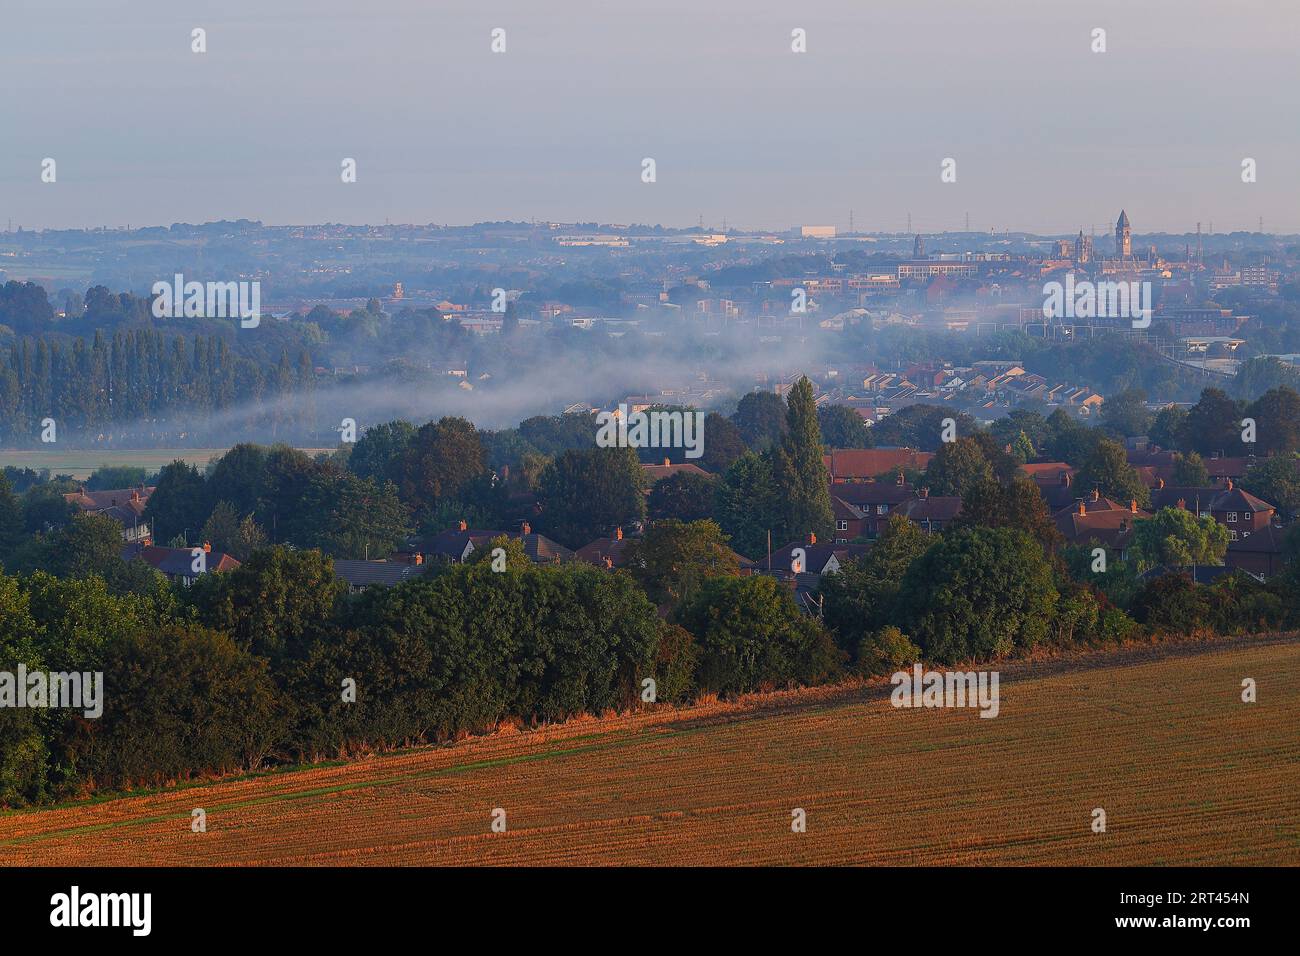 A view of Wakefield City on a misty morning, as seen from nearby Sandal Castle. Stock Photo